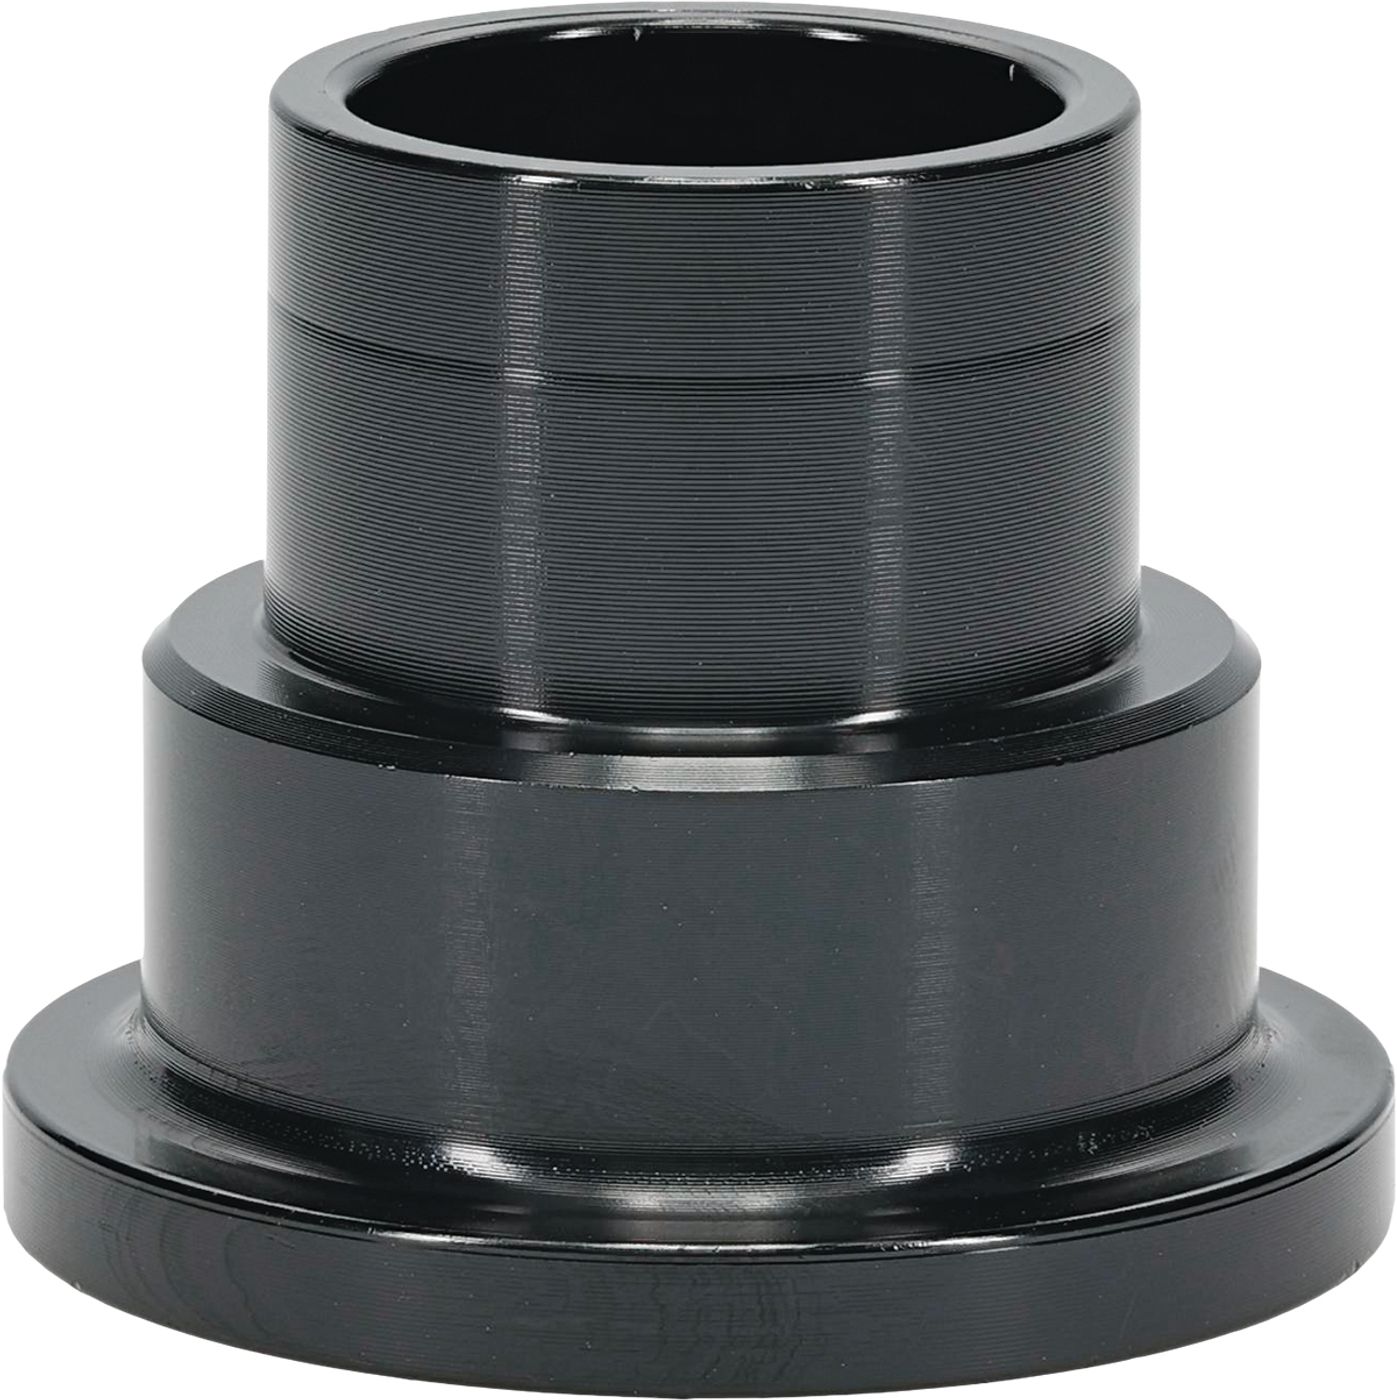 Wrp Rear Wheel Spacer Kits - WRP111092-1 image